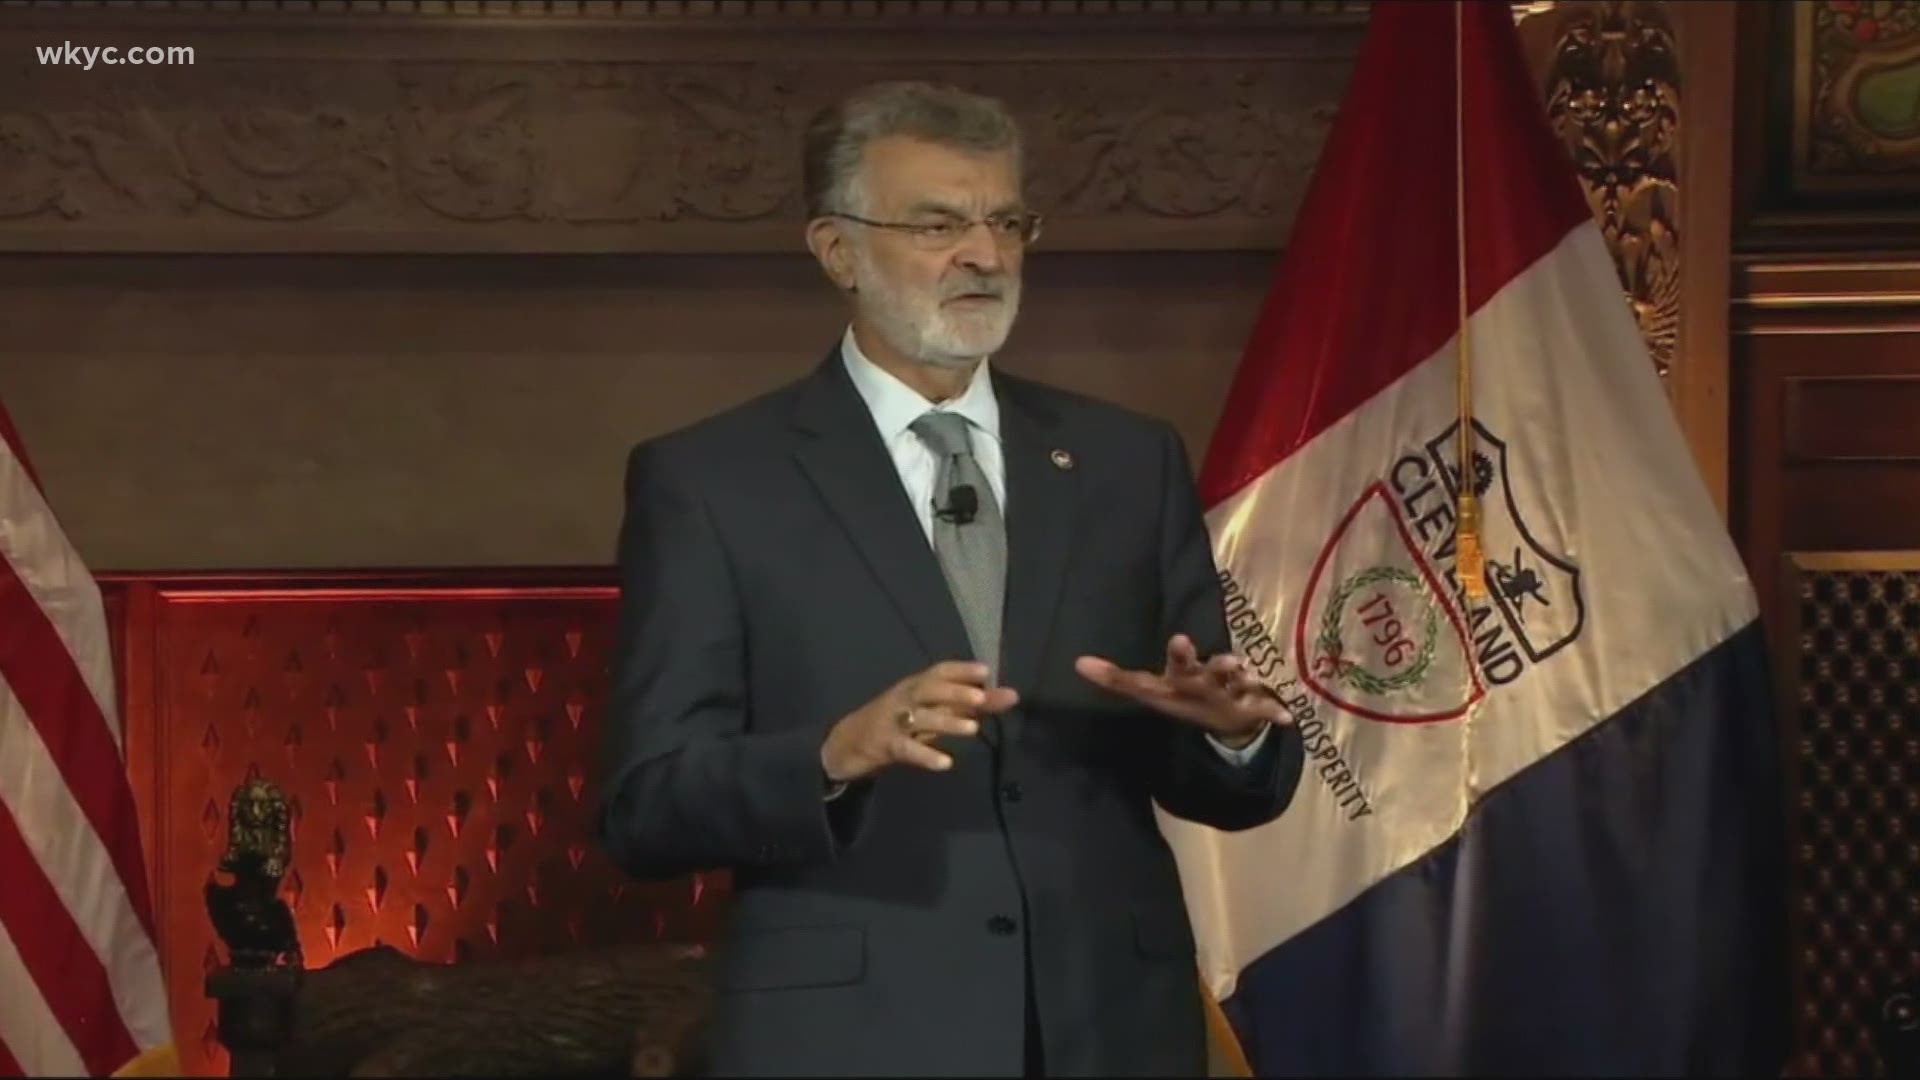 Mayor  Jackson laid out his goals for the coming year as he gave his Virtual State of the City address on Thursday. What did you think of his remarks?